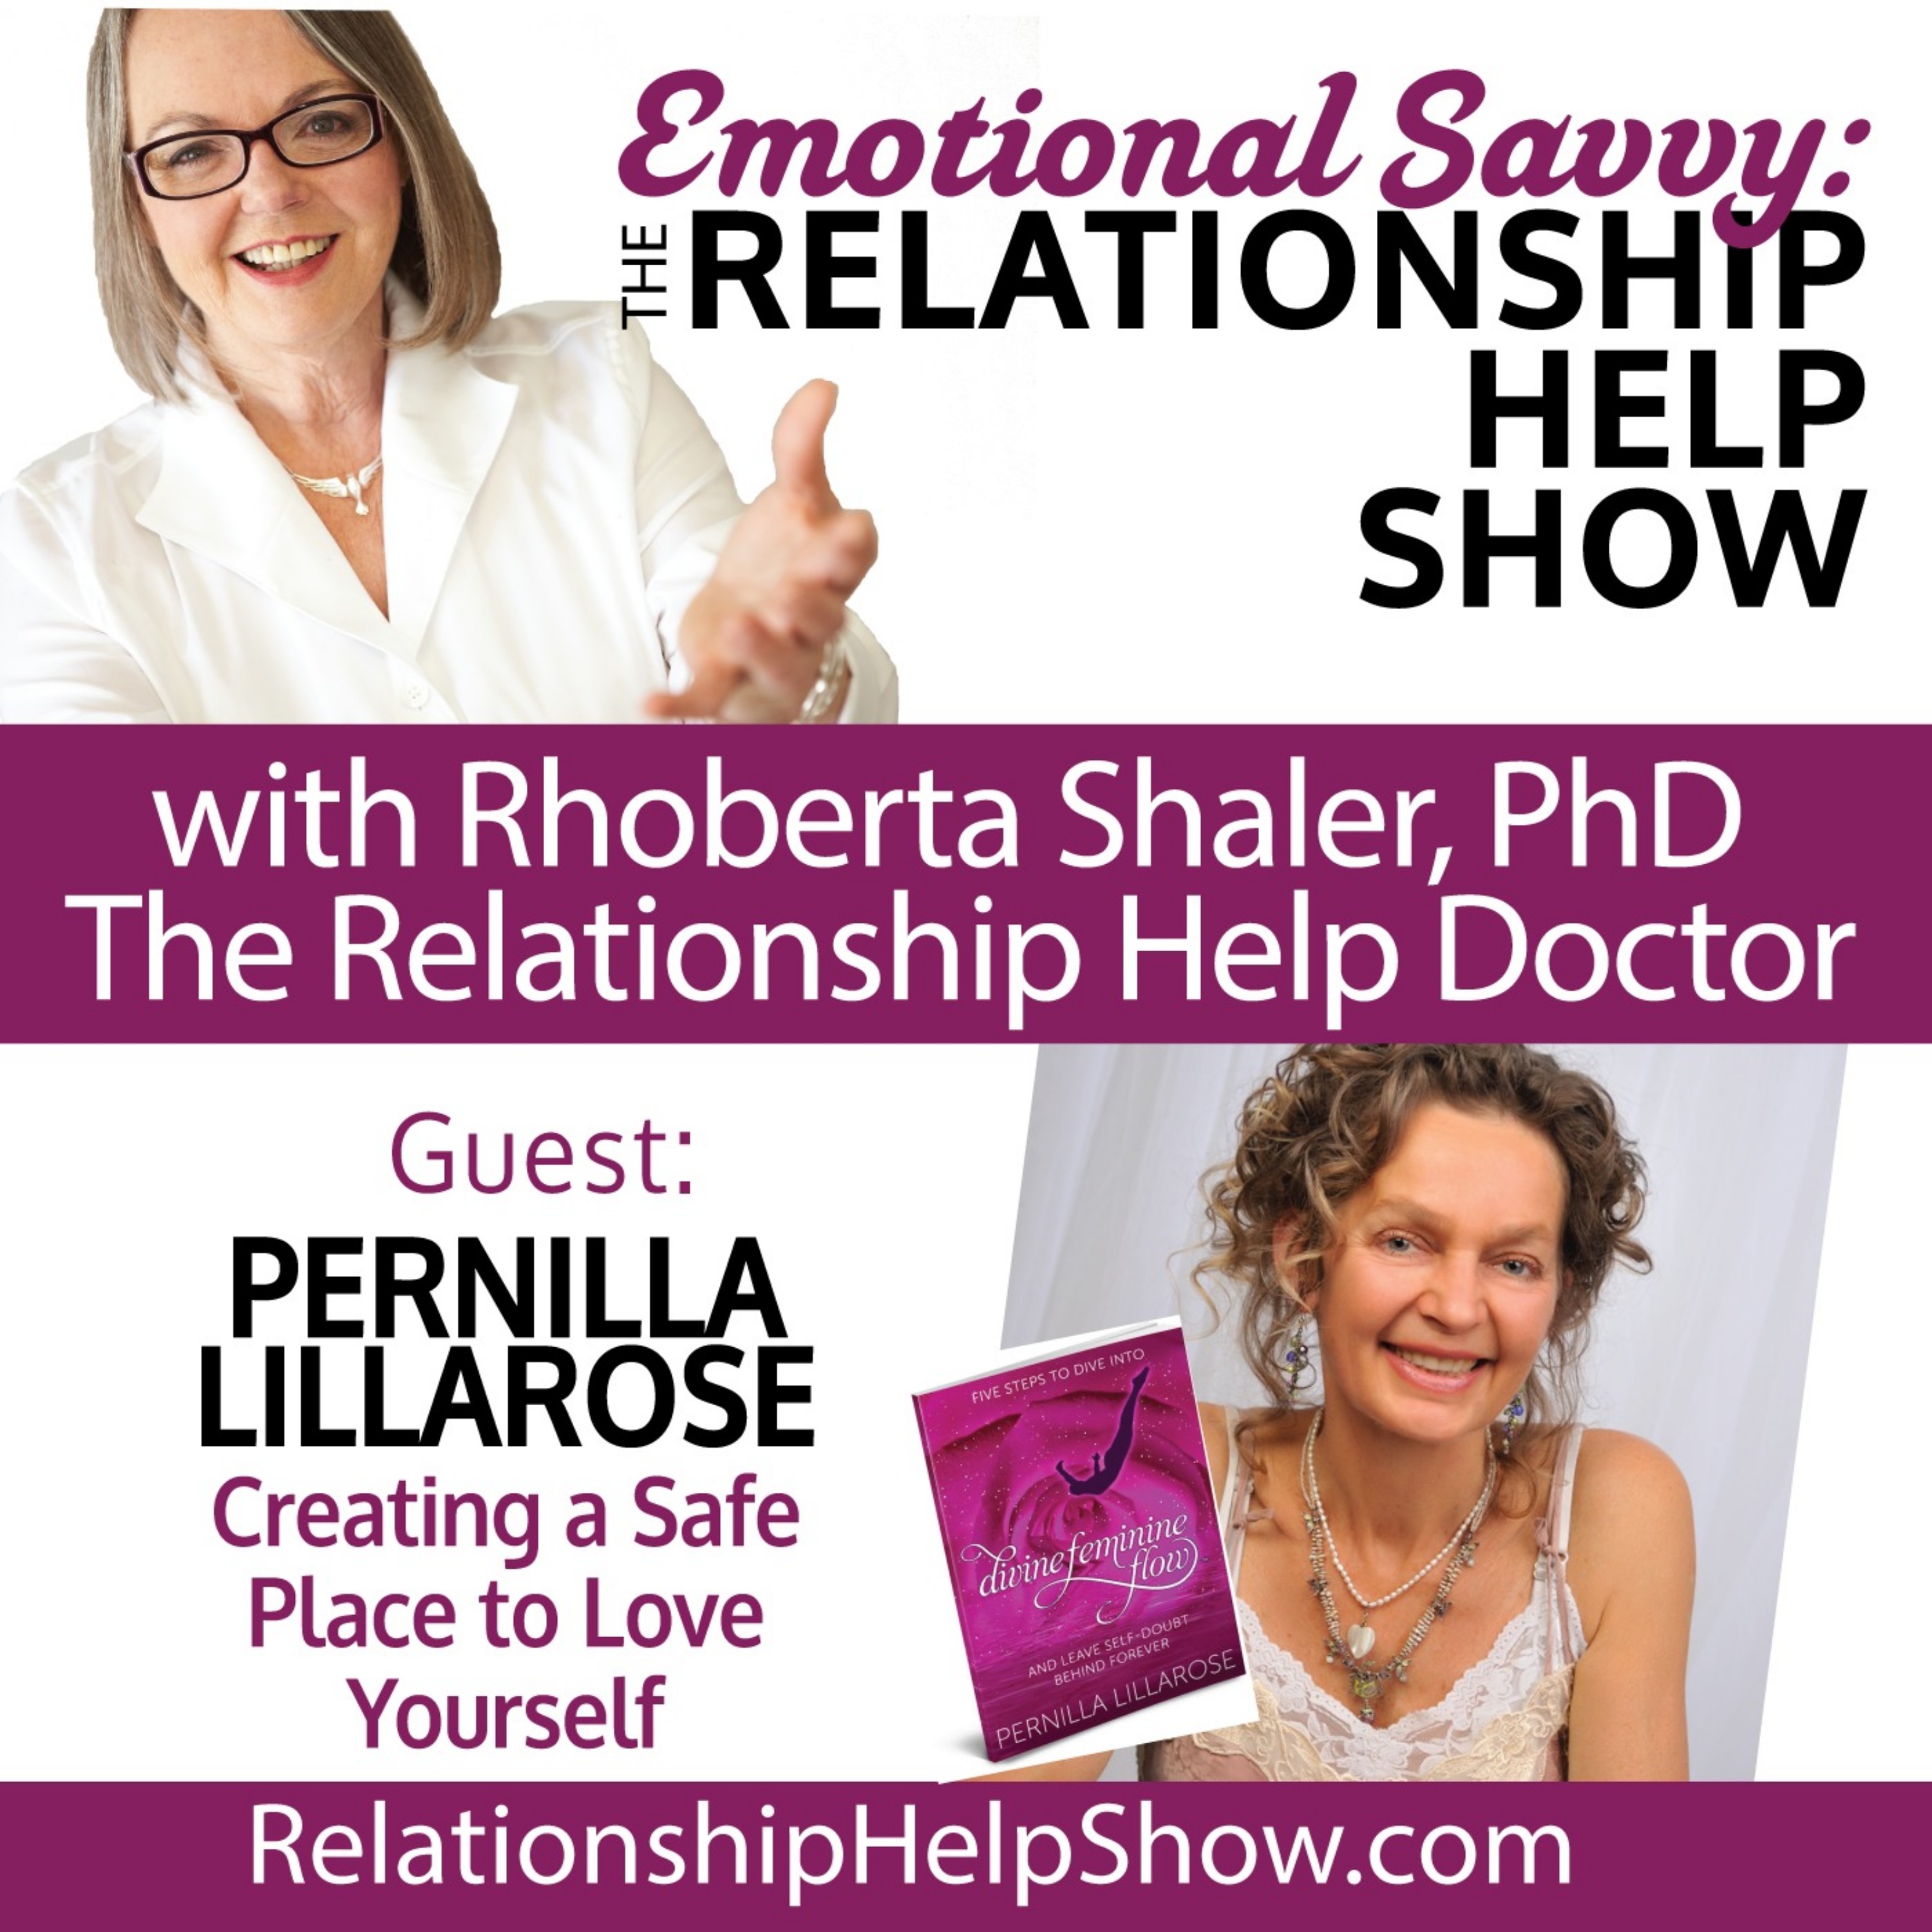 Creating a Safe Place to Love Yourself   GUEST: Pernilla Lillarose